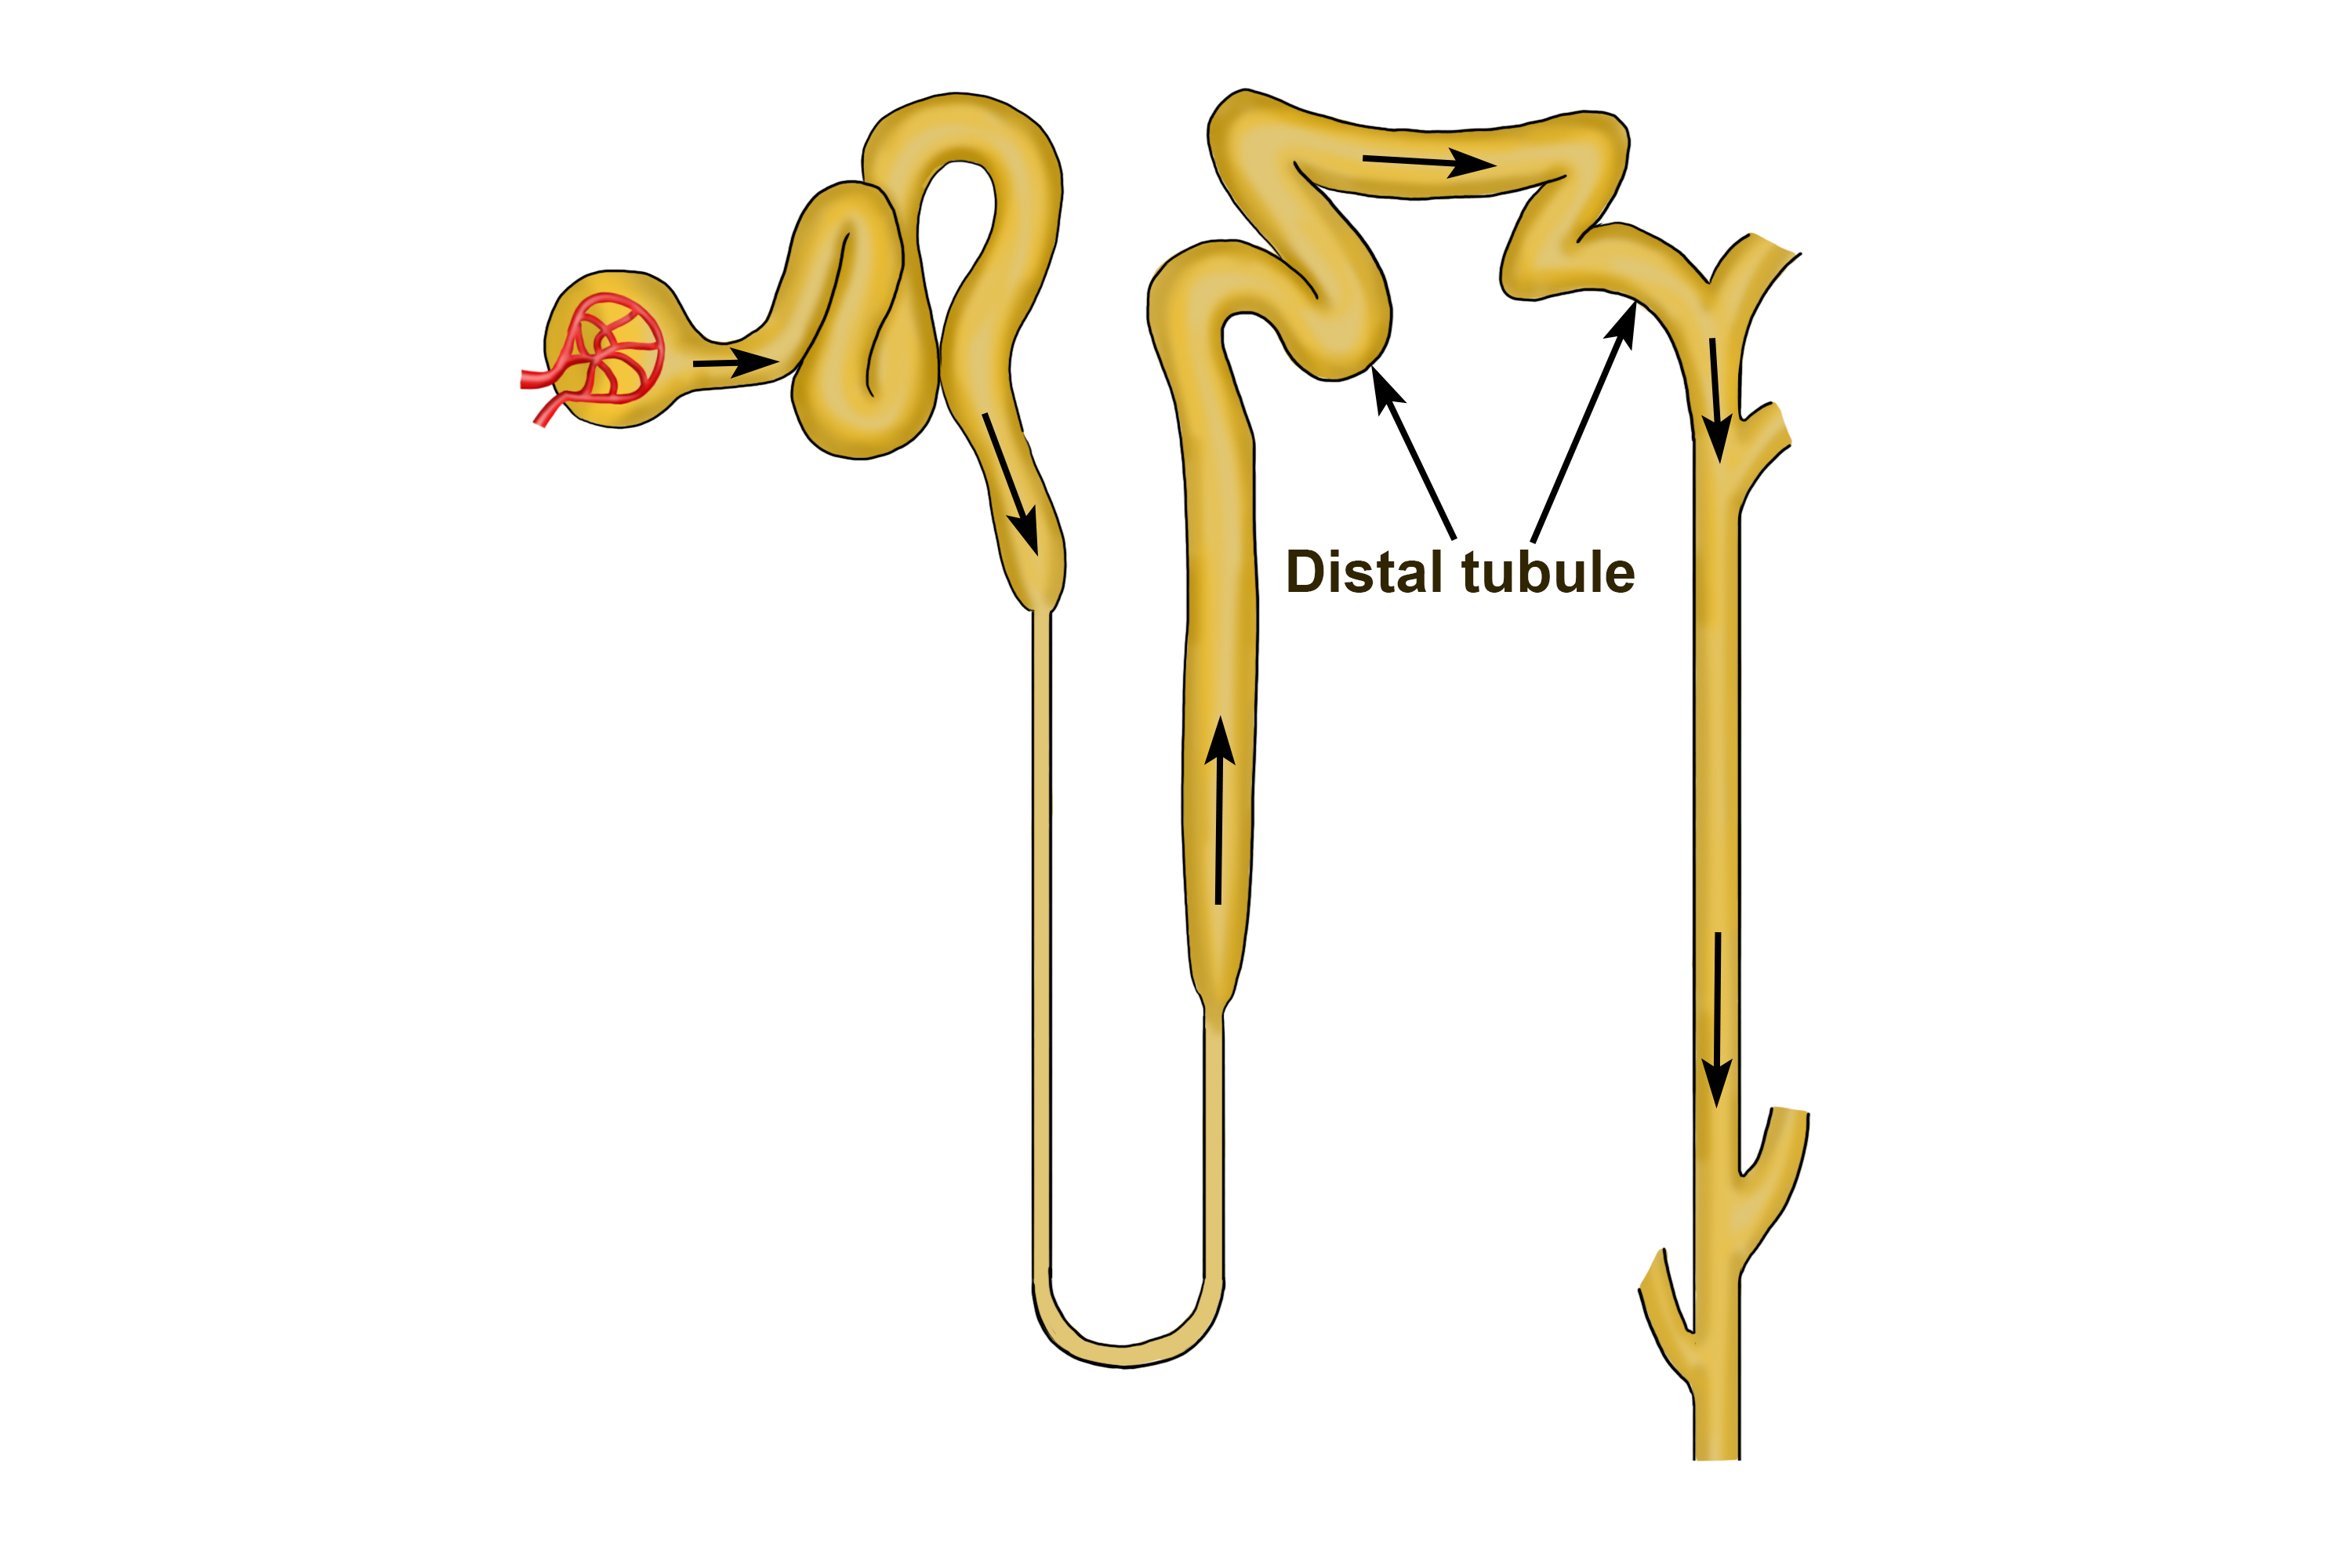 The distal tubule is an other series of bends where substances are absorbed back into the blood